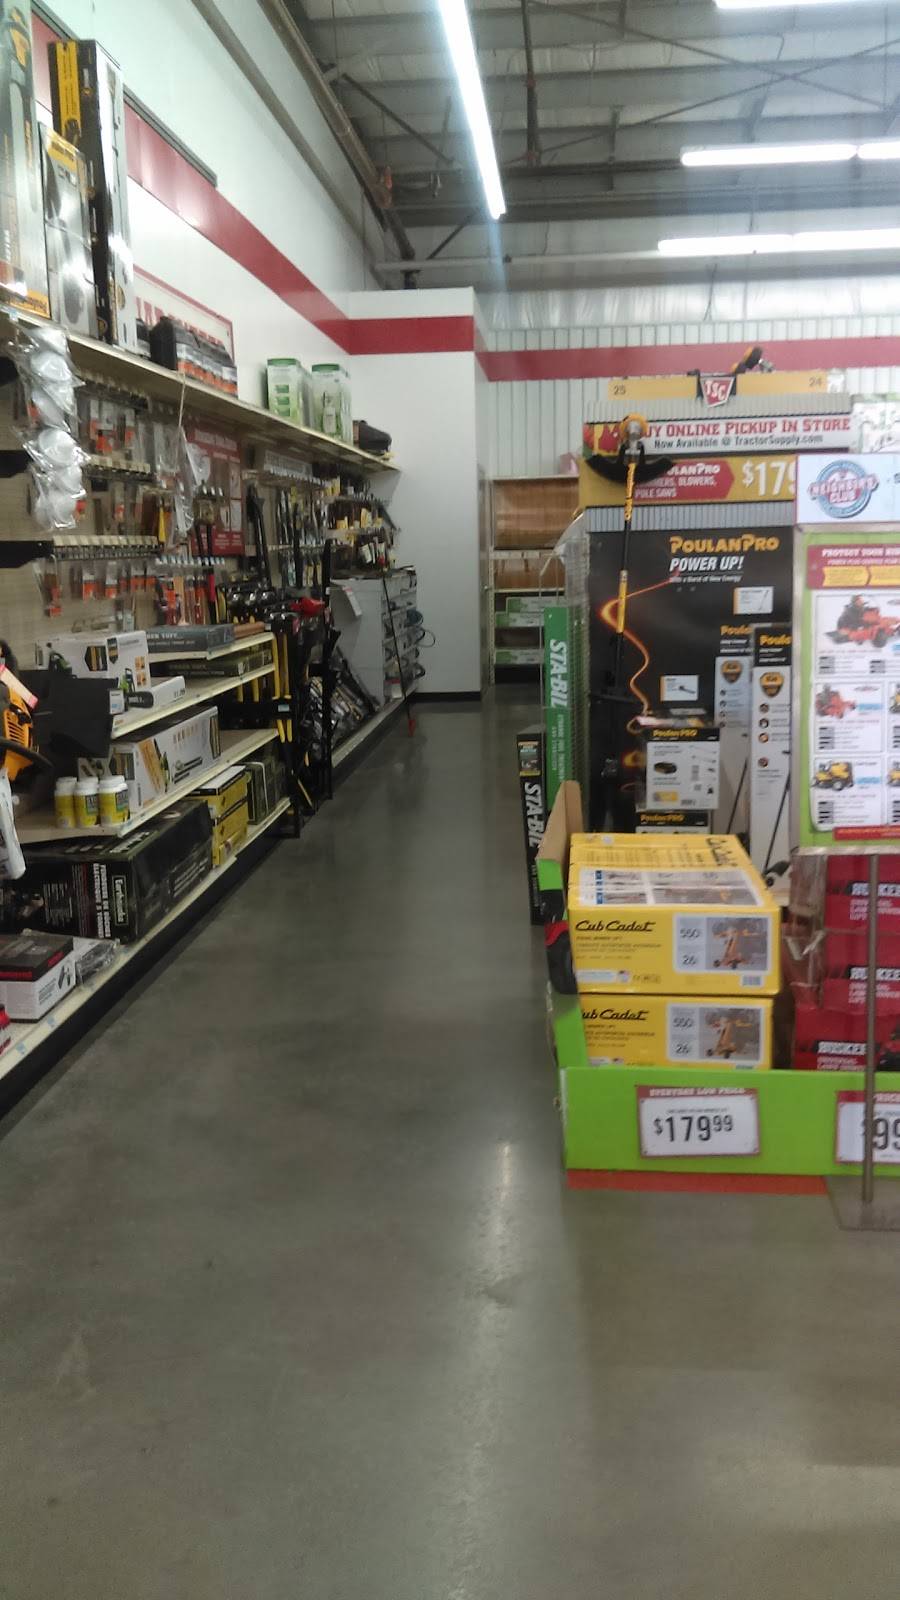 Tractor Supply Co. | 2100 W N Service Rd, West Memphis, AR 72301, USA | Phone: (870) 735-5841